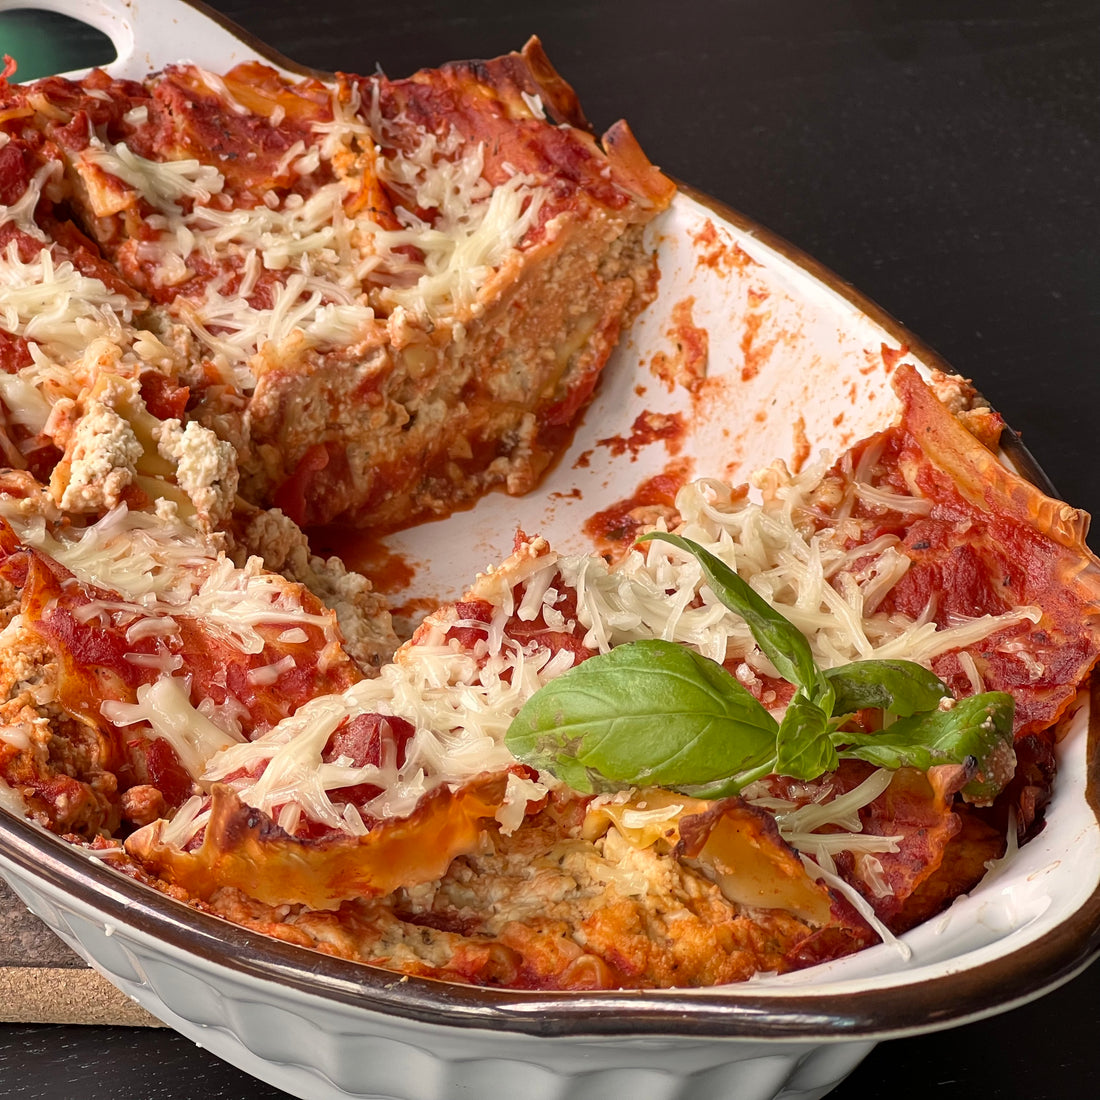 Easy Italian baked dish for the whole family to enjoy. Tender pasta layered with a robust tomato sauce, creamy béchamel sauce, and tofu ricotta makes a simple, filling, satisfying meal.